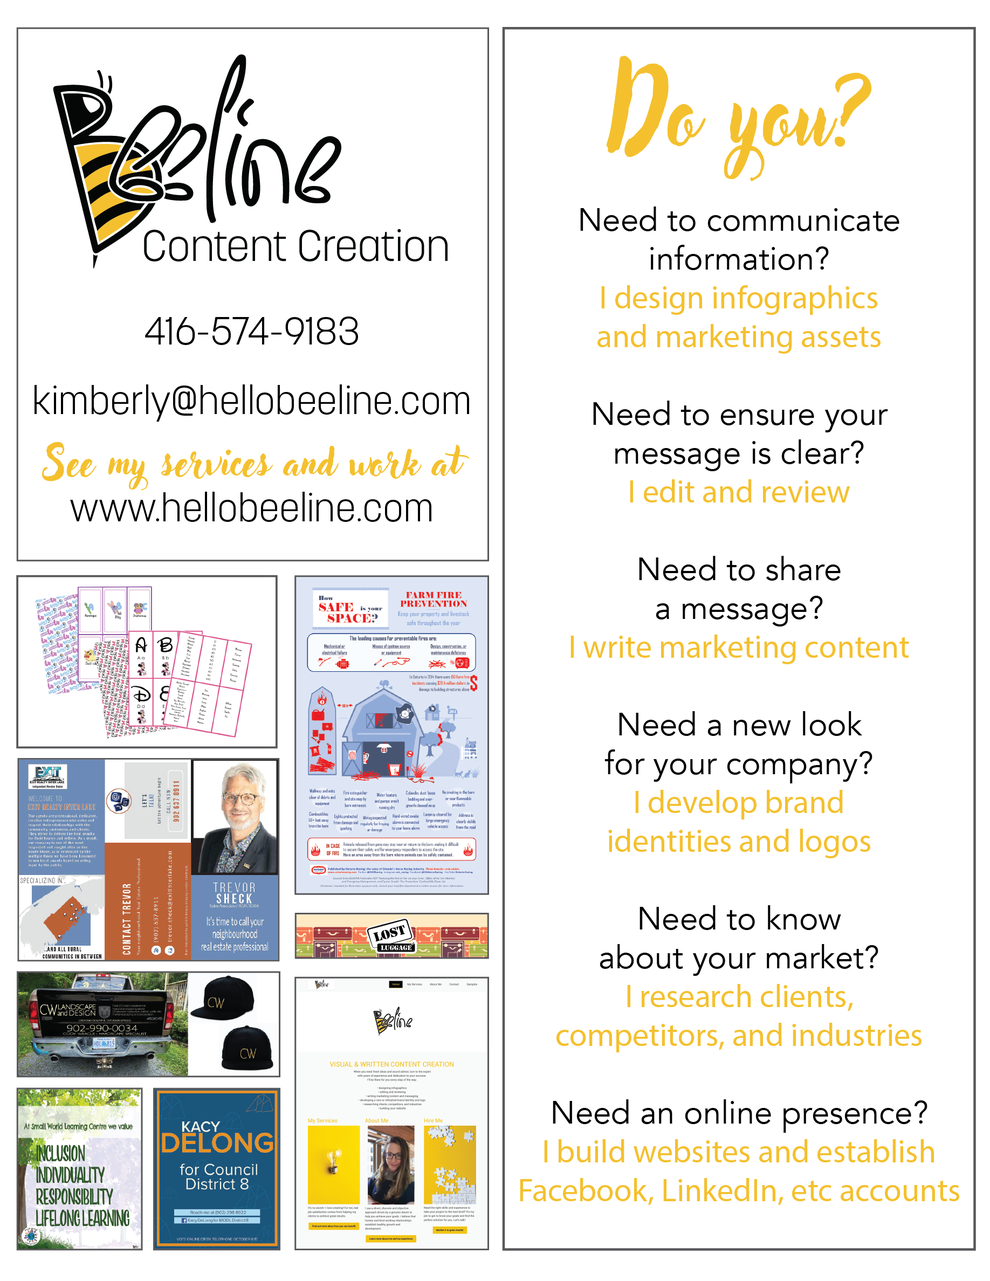 A poster showing examples of work completed, a list of services, and contact info for Beeline.